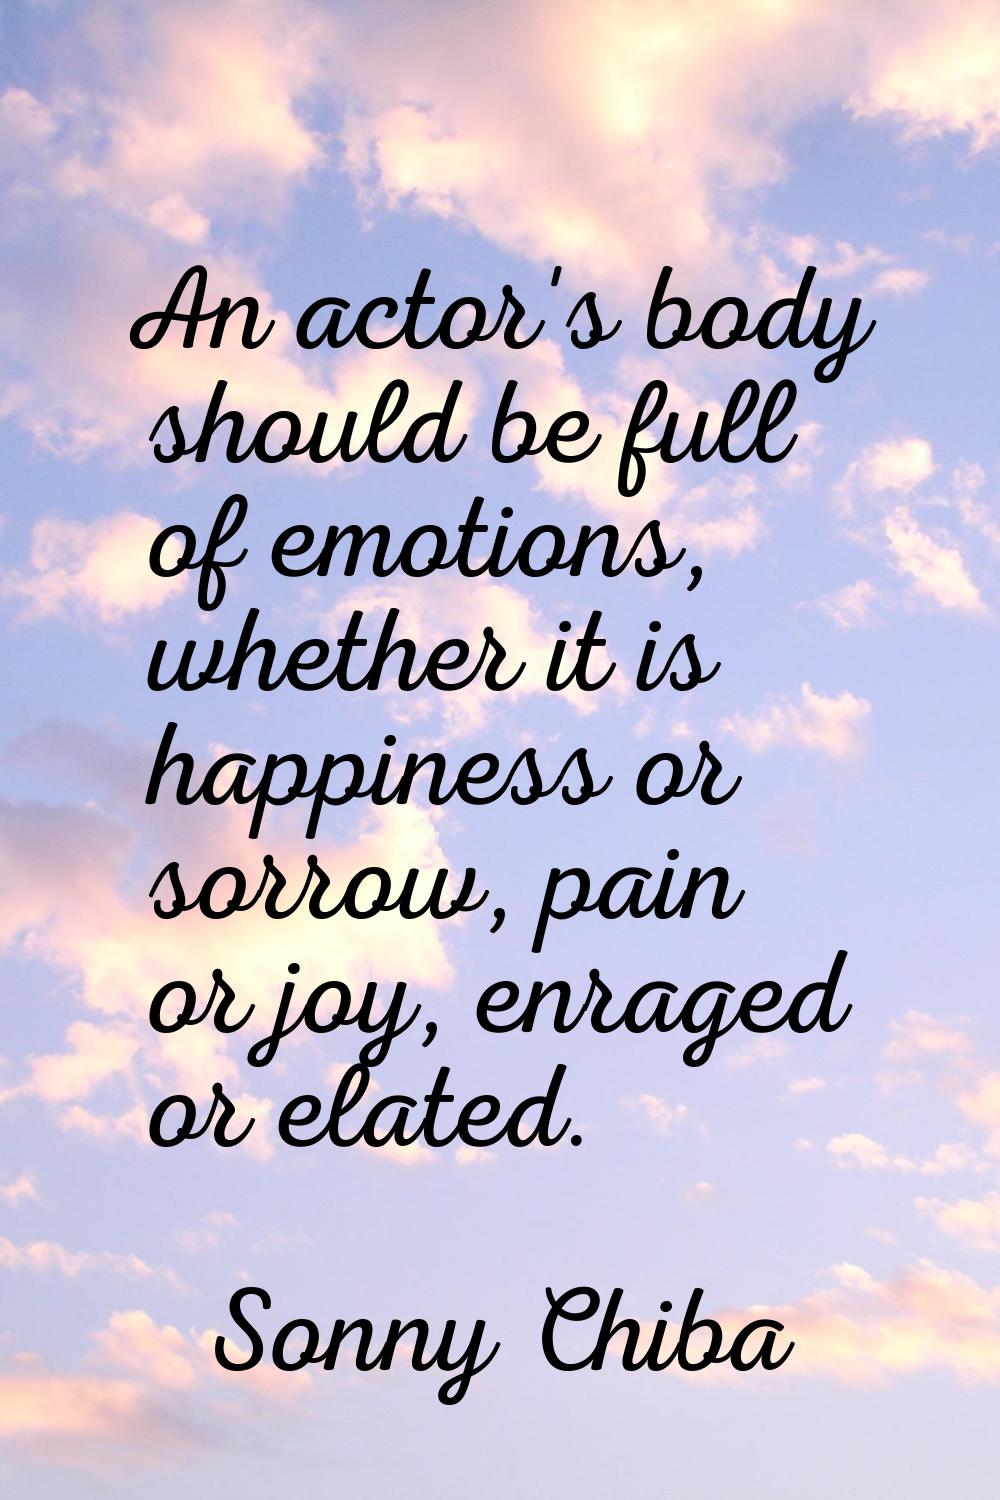 An actor's body should be full of emotions, whether it is happiness or sorrow, pain or joy, enraged